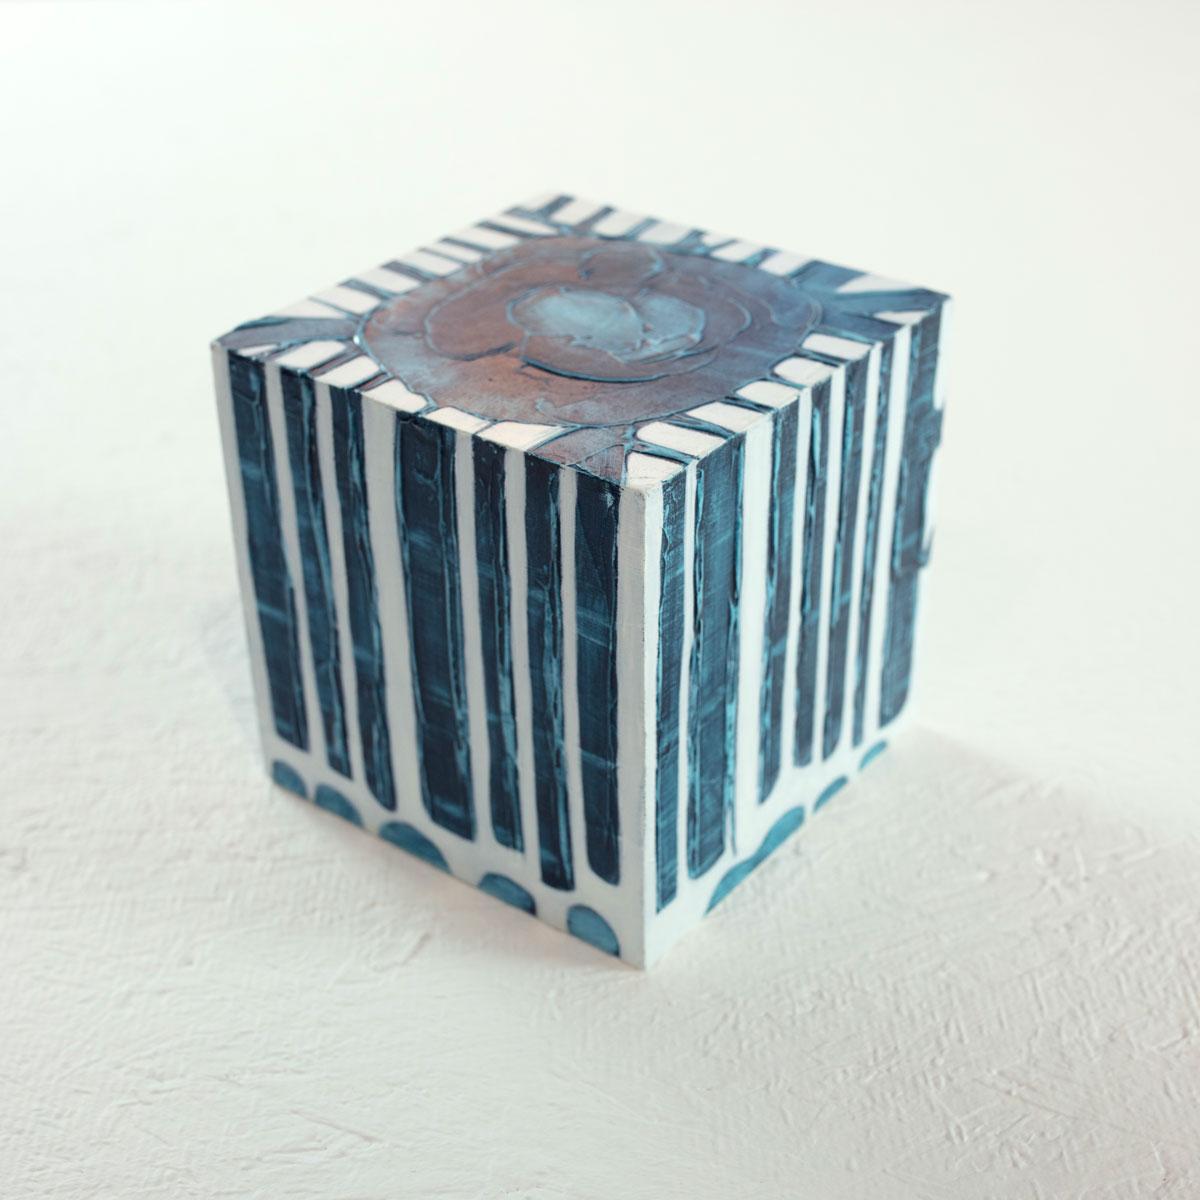 Sofie Swann Abstract Painting - "Little Swann 5" Painted Wooden Cube Sculpture